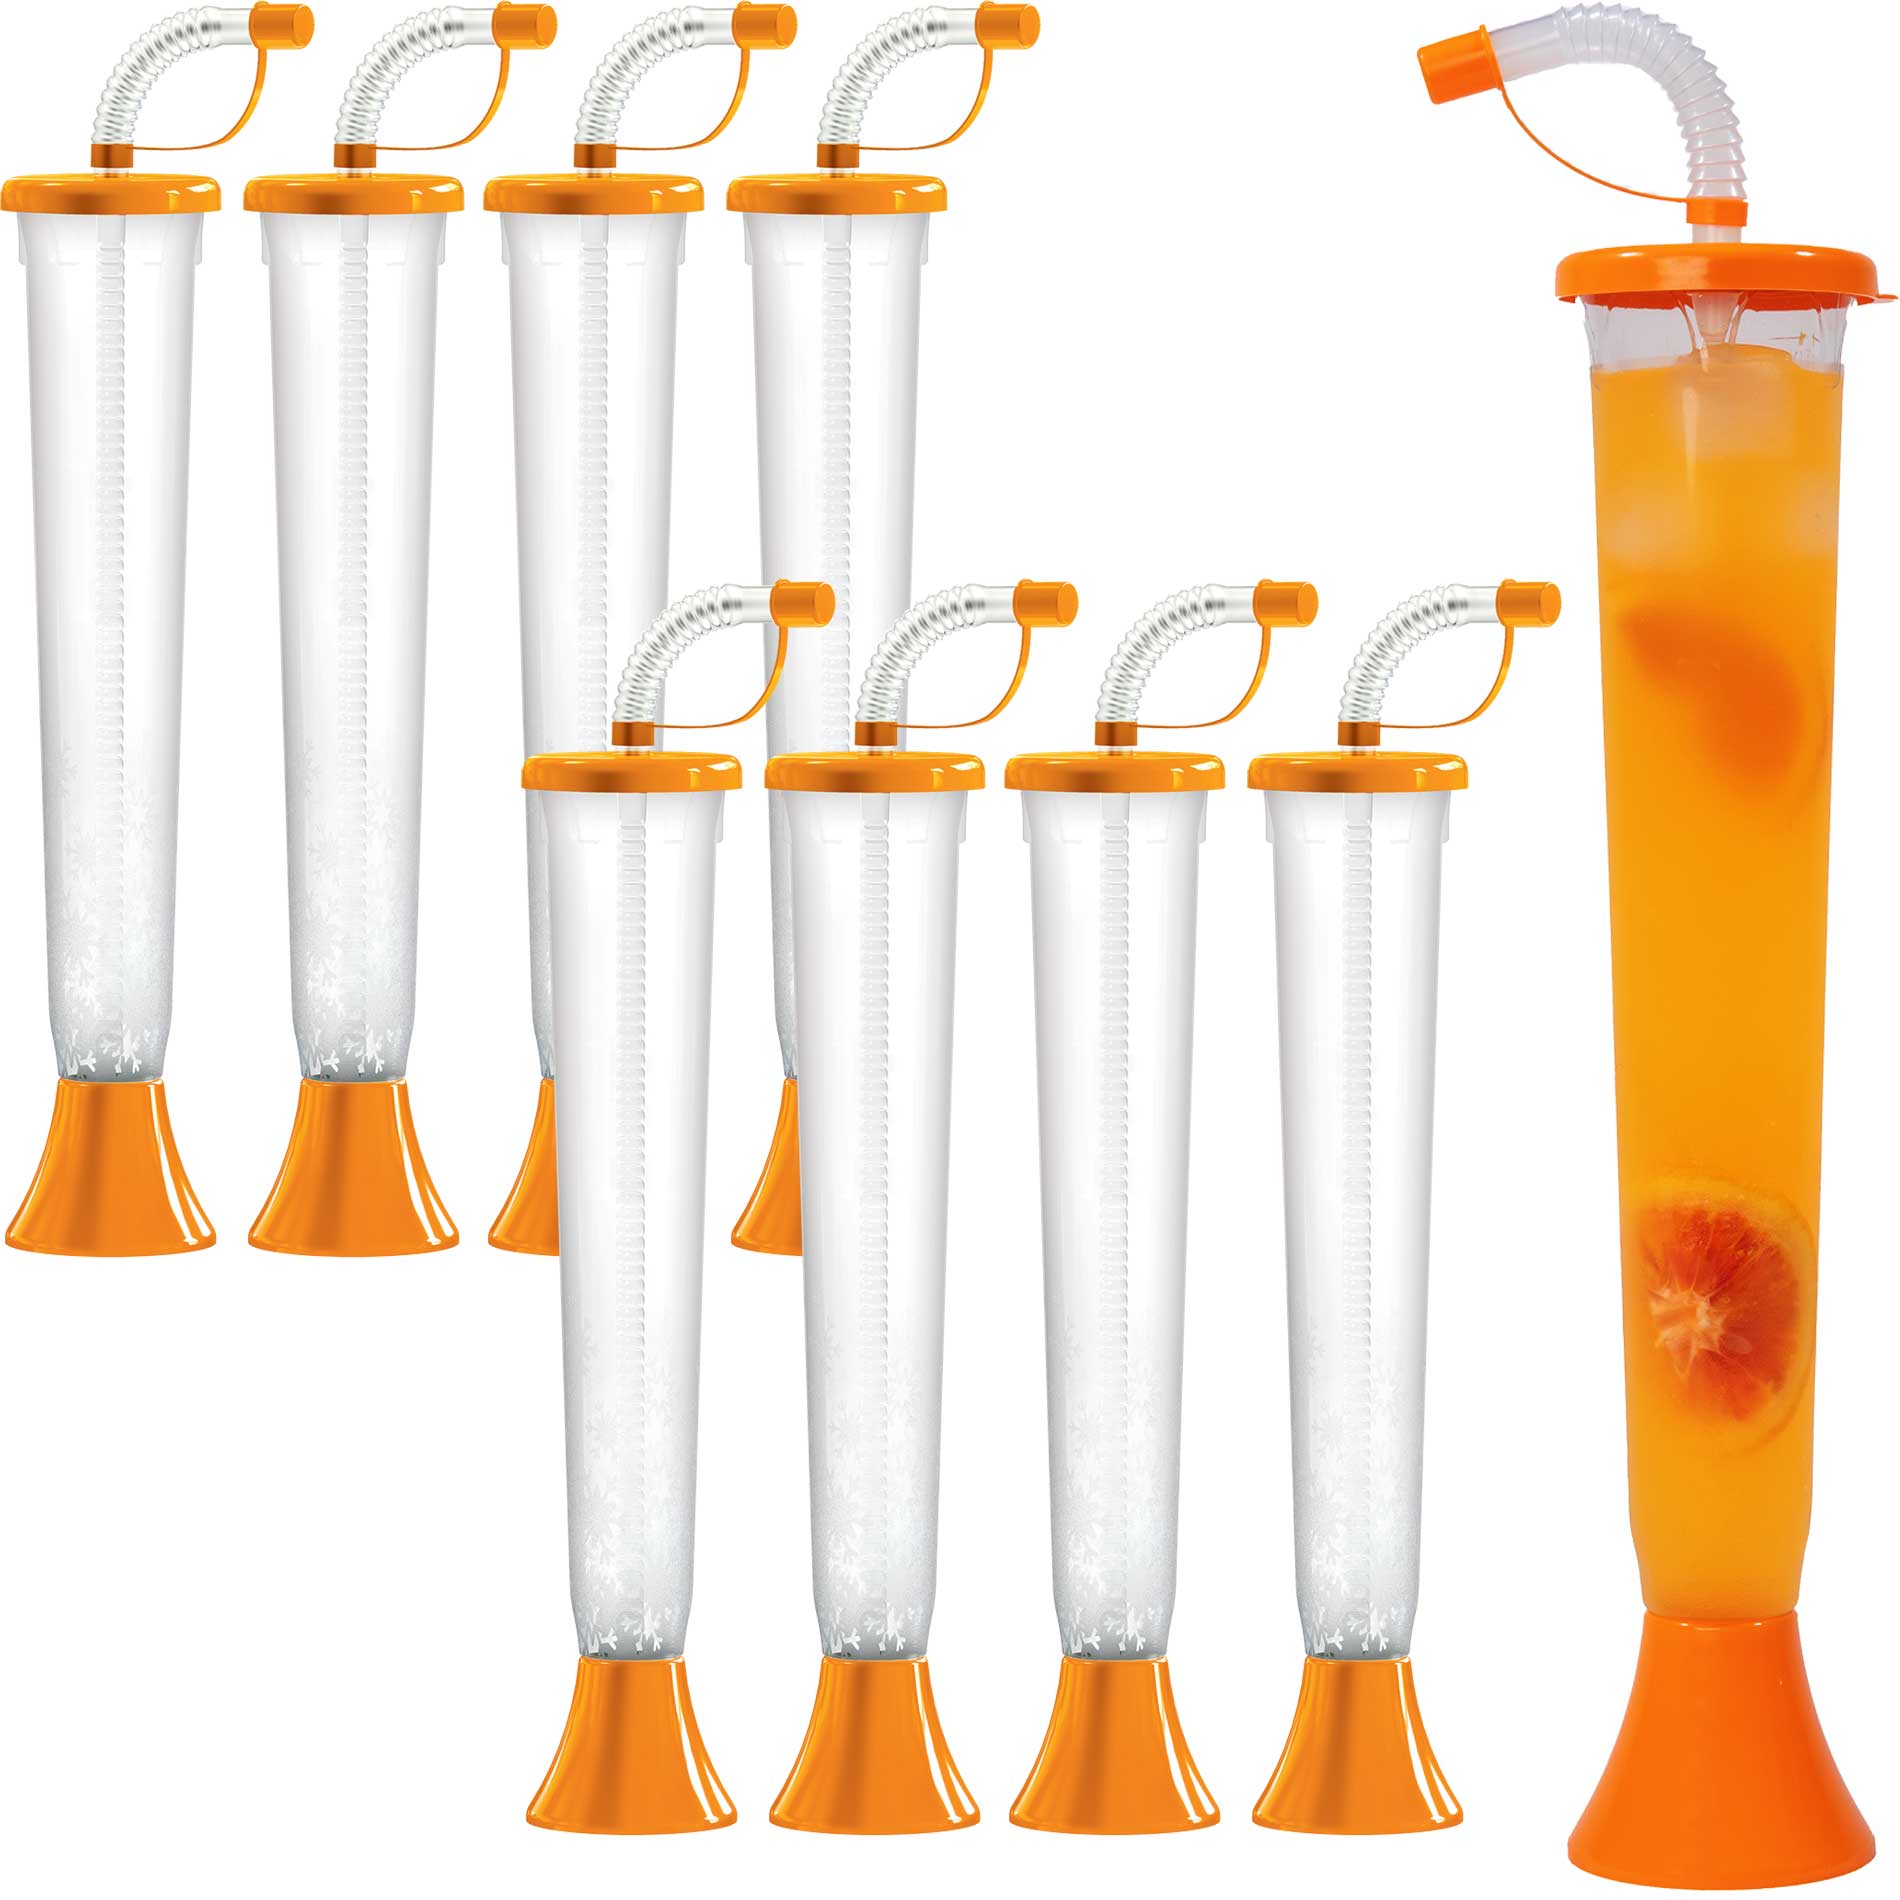 http://noveltycupsusa.com/cdn/shop/files/sweet-world-usa-yard-cups-54-or-108-cups-yard-cups-with-orange-lids-and-straws-14oz-for-margaritas-and-frozen-drinks-cups-with-lids-and-straws-35523663397023.jpg?v=1684775674